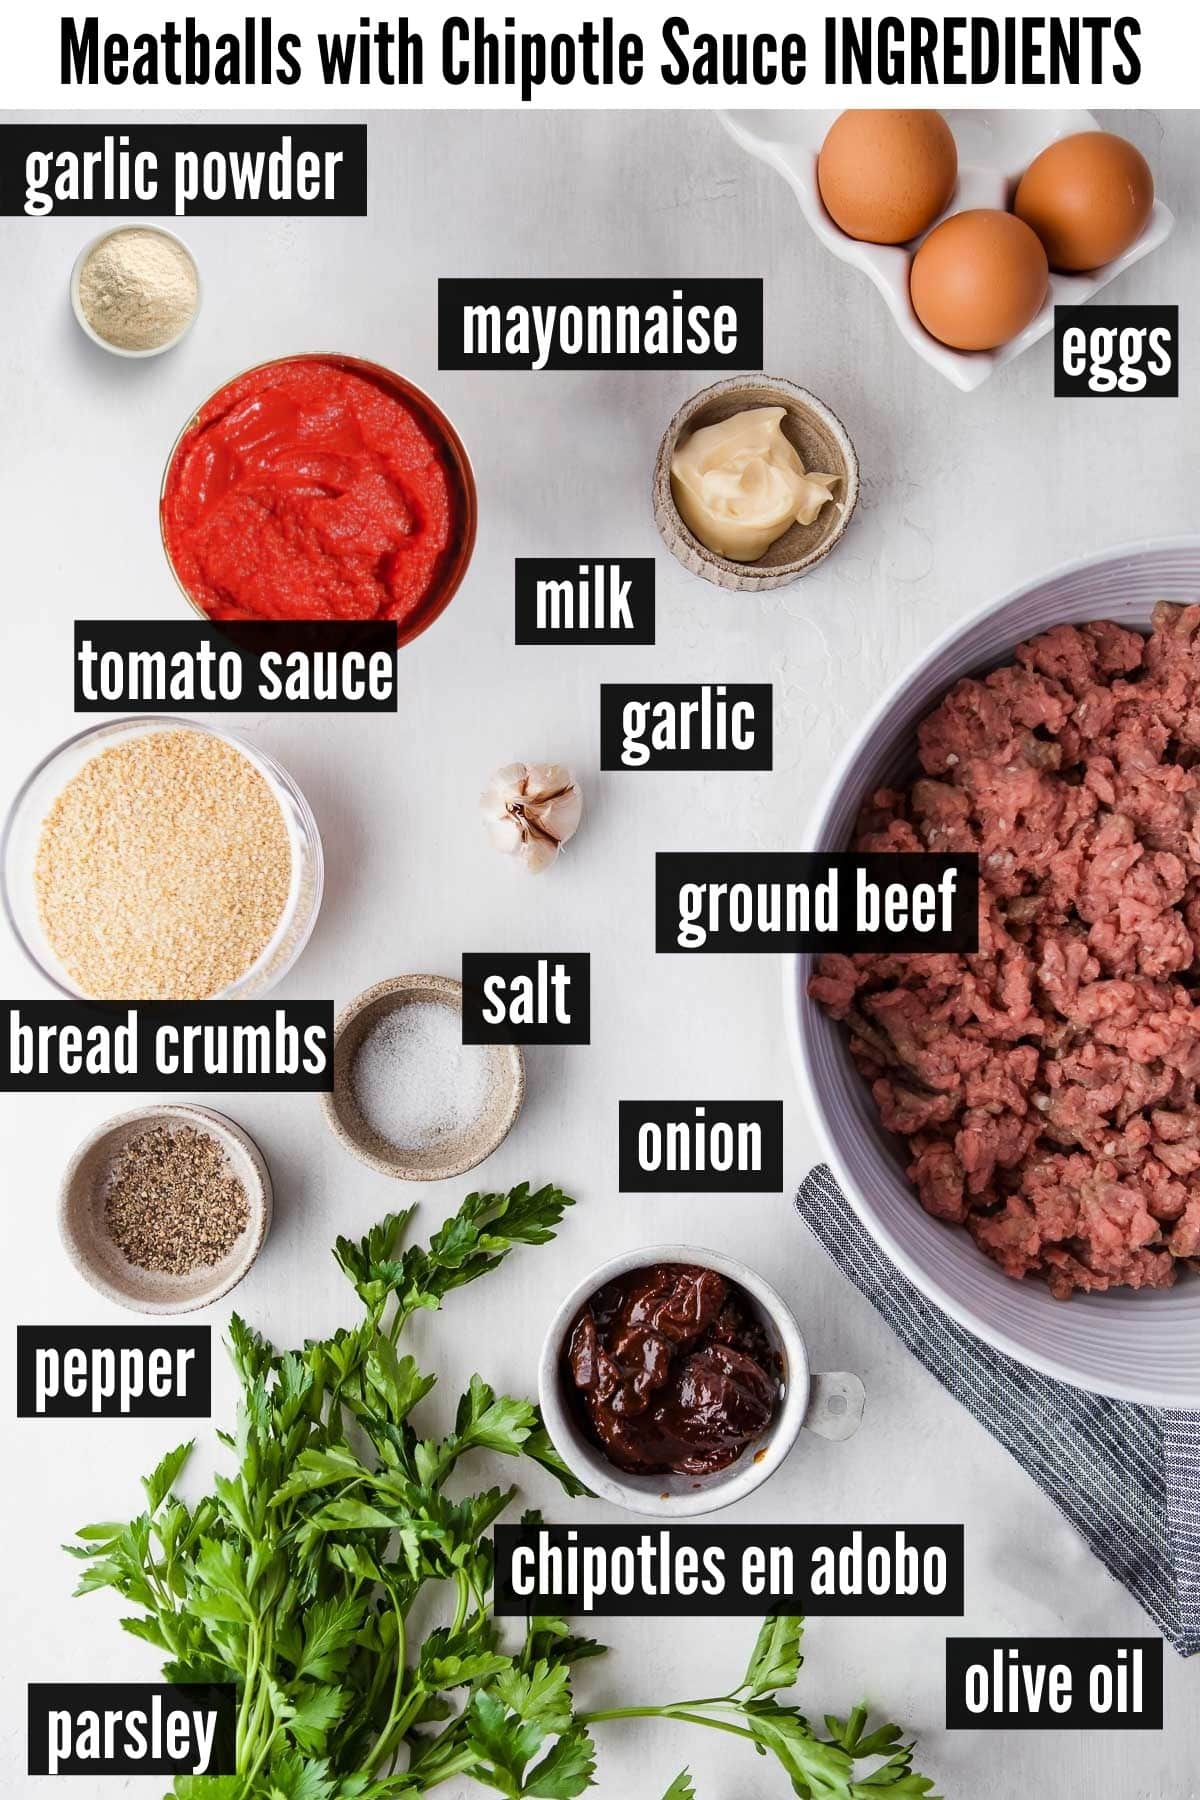 meatballs with chipotle sauce labelled ingredients